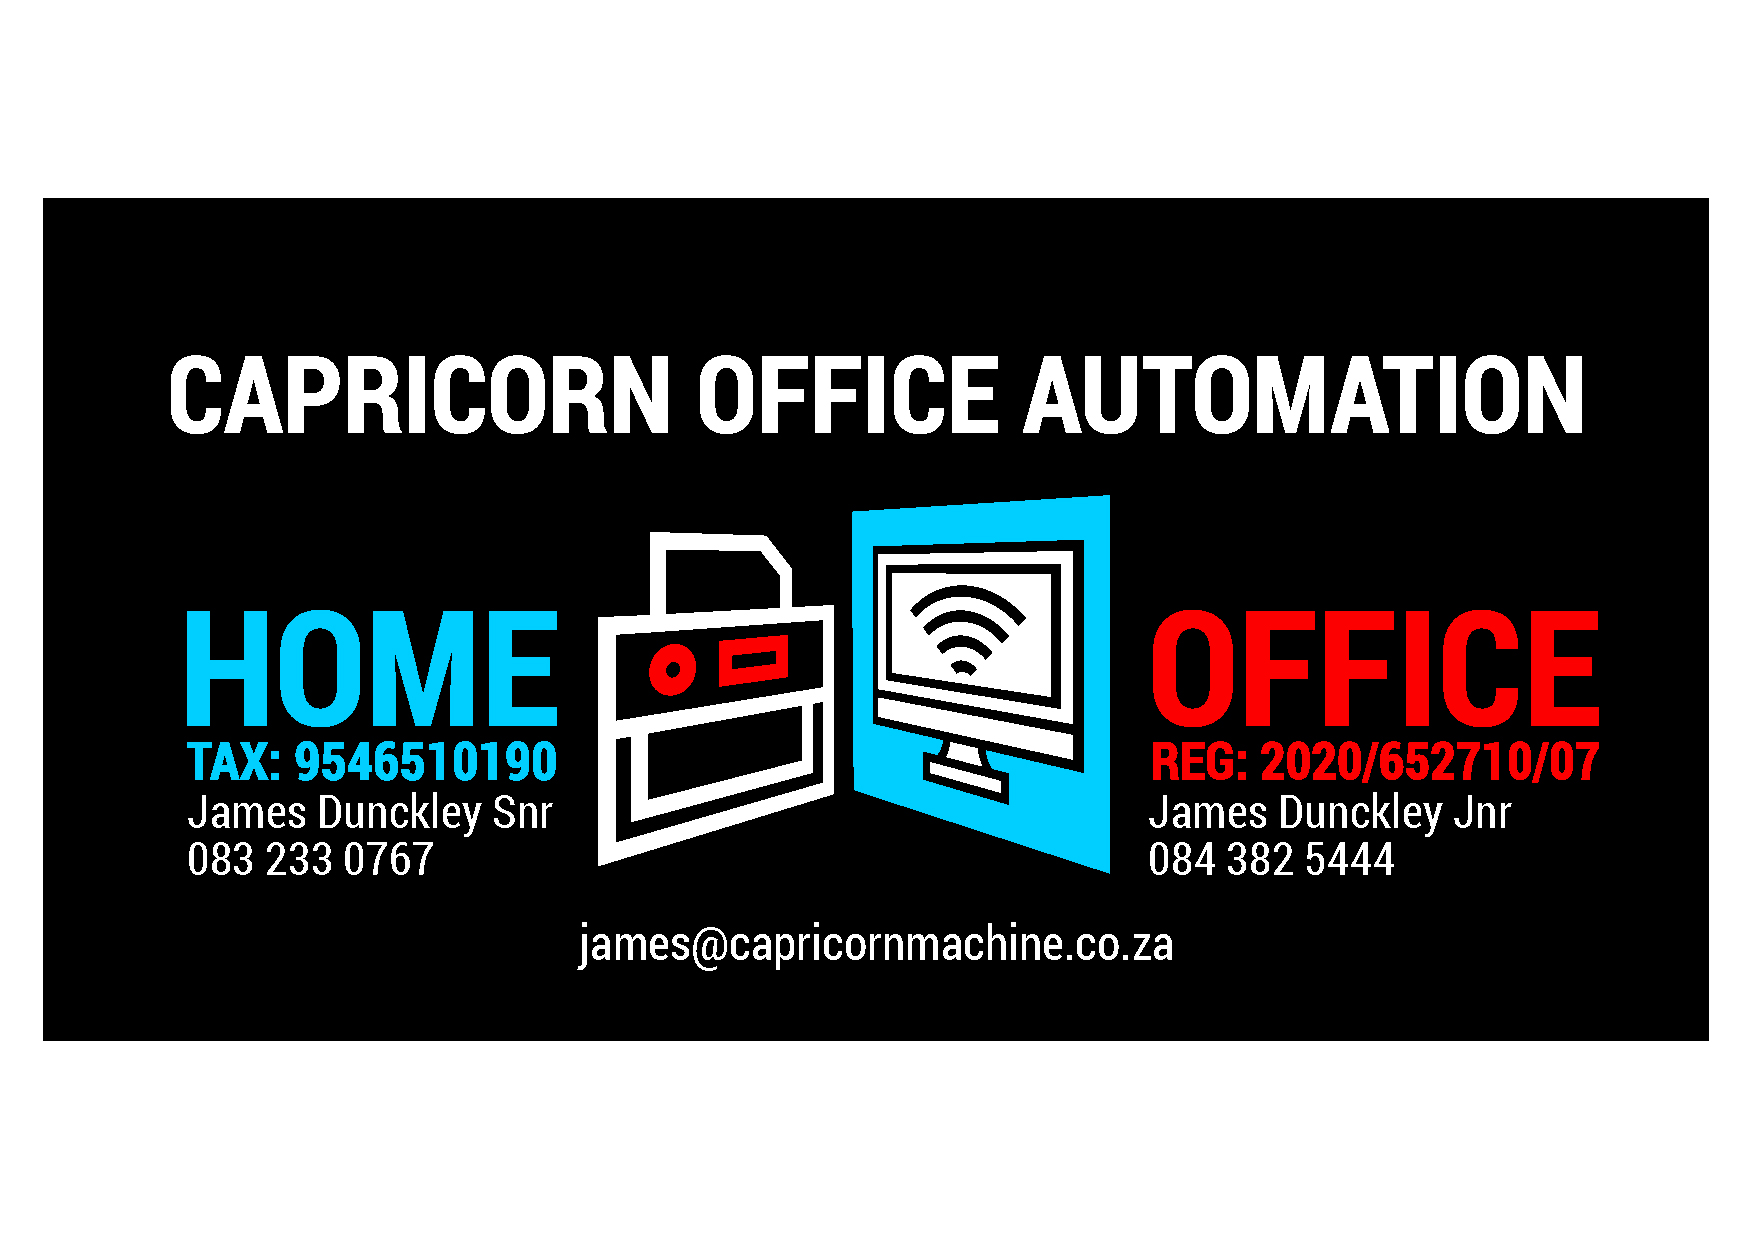 Business Listing for Capricorn Office Automation